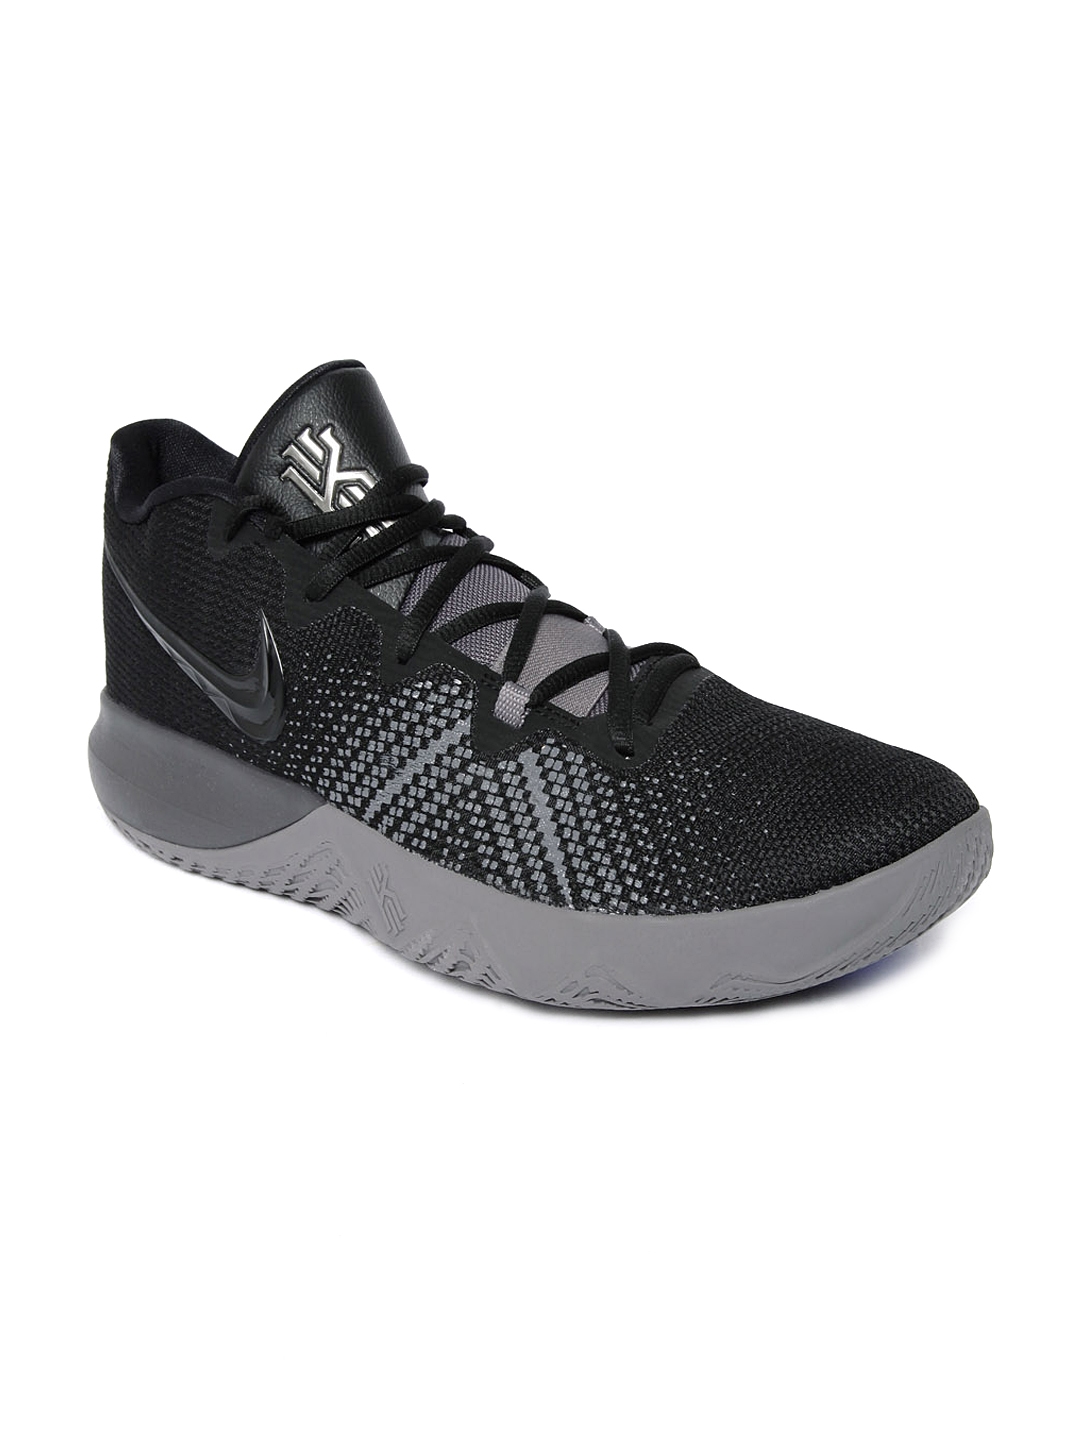 kyrie basketball shoes india